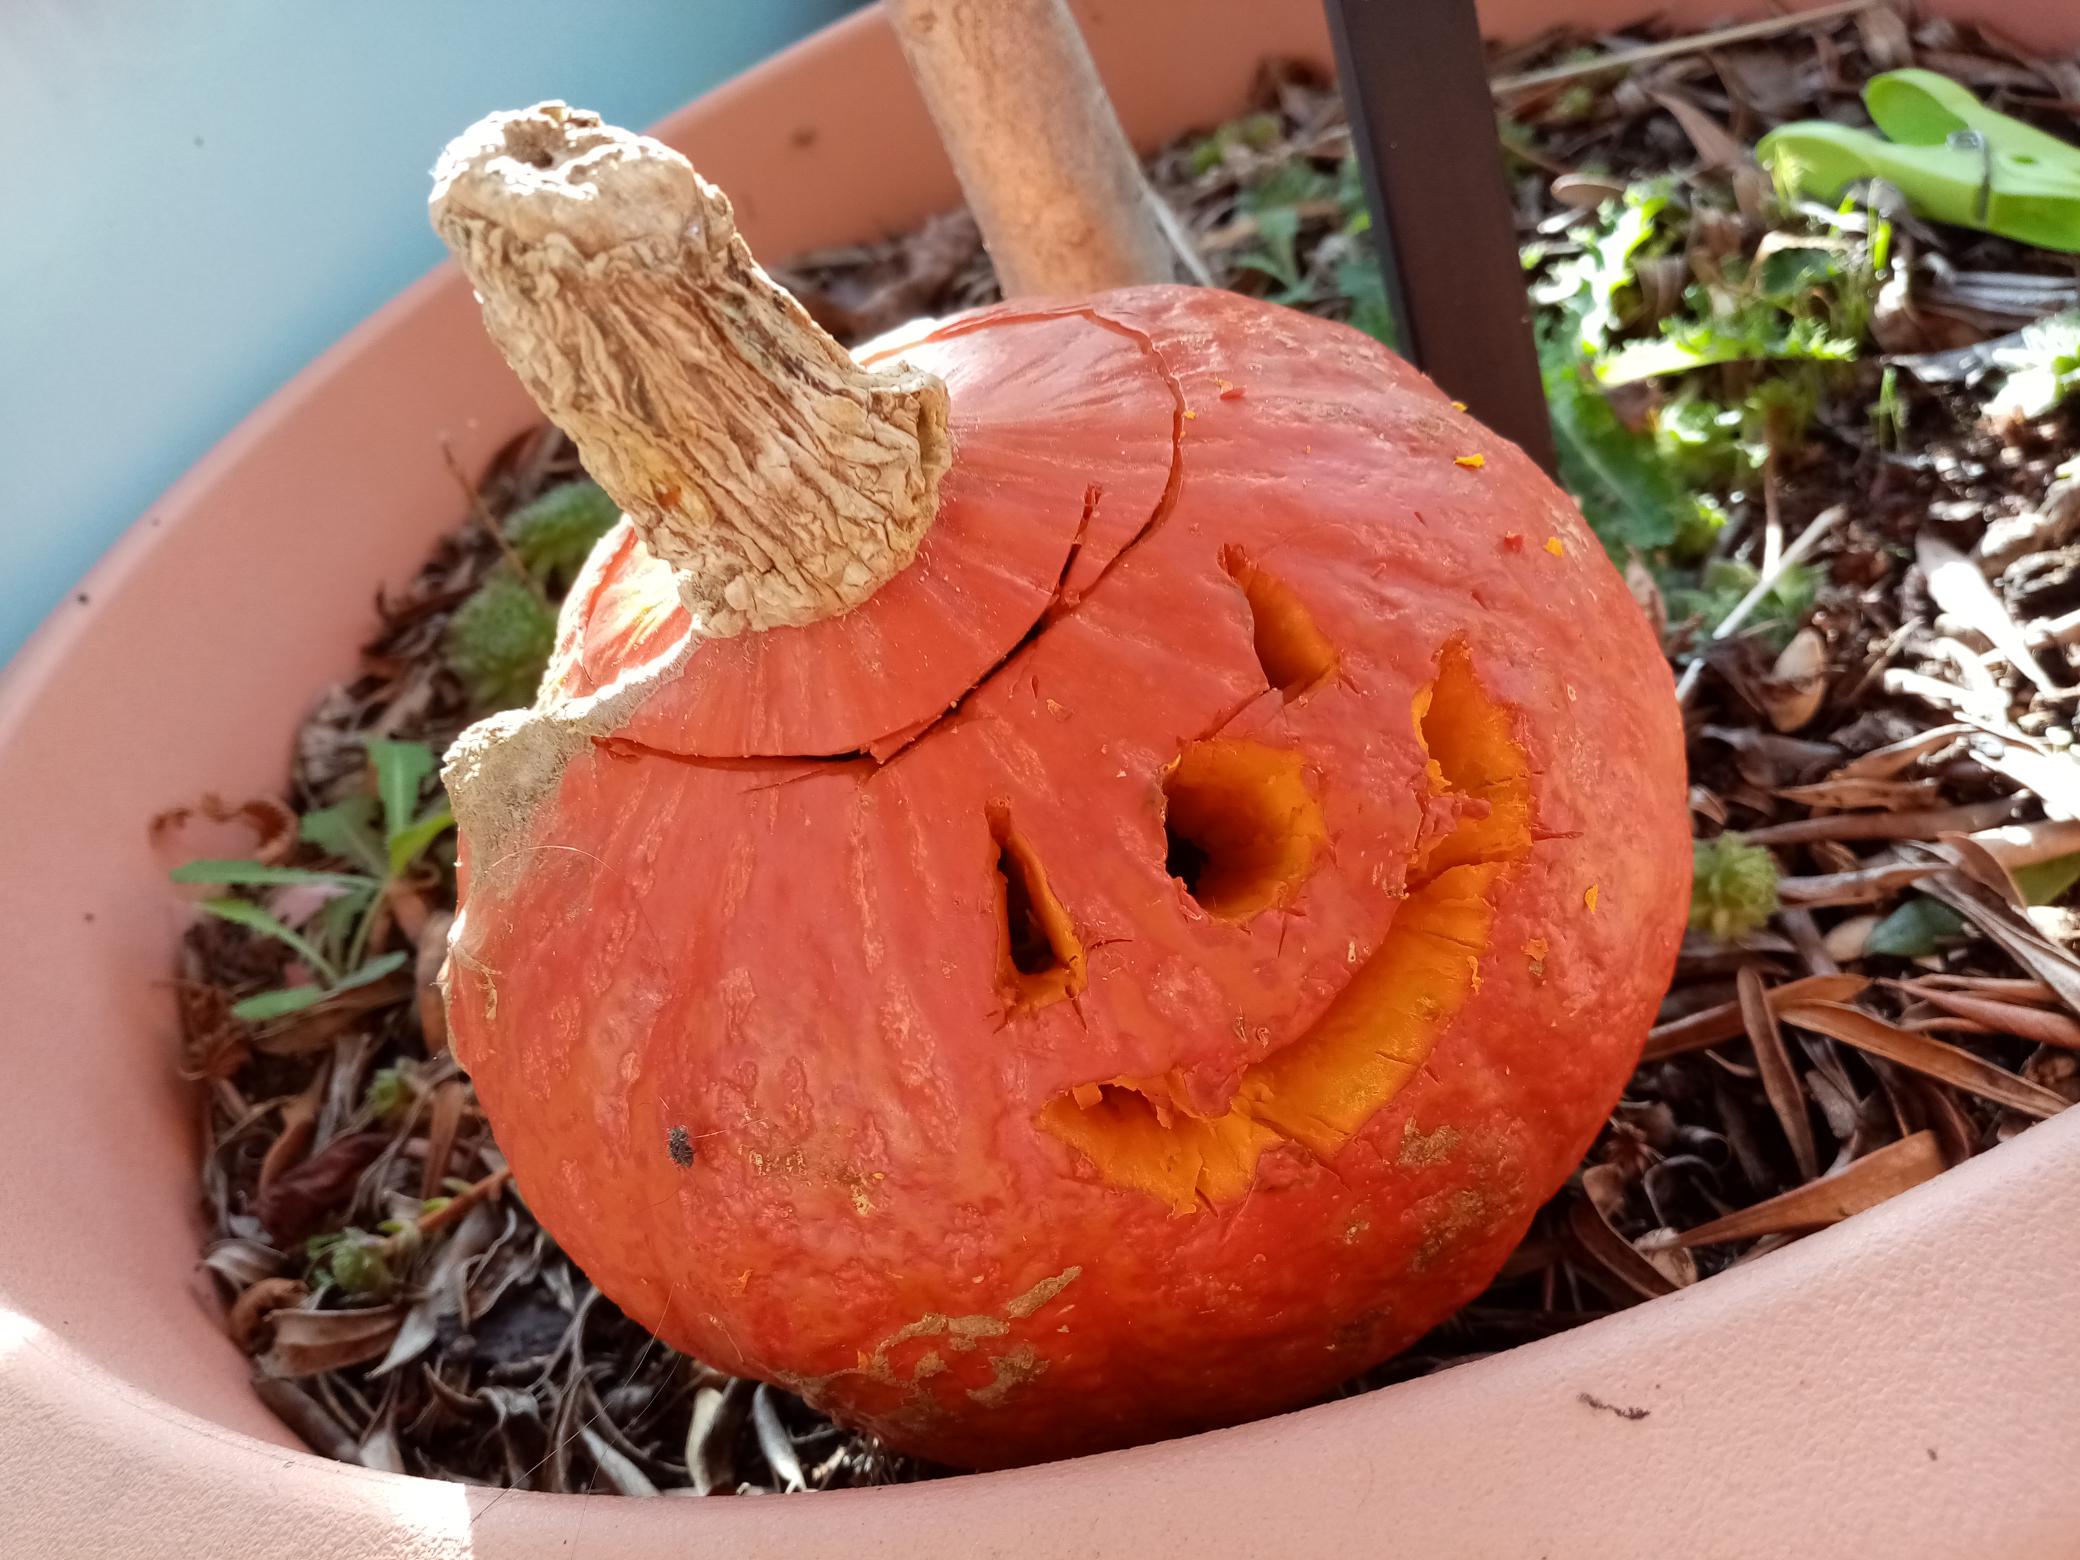 Making the most out of your Pumpkins